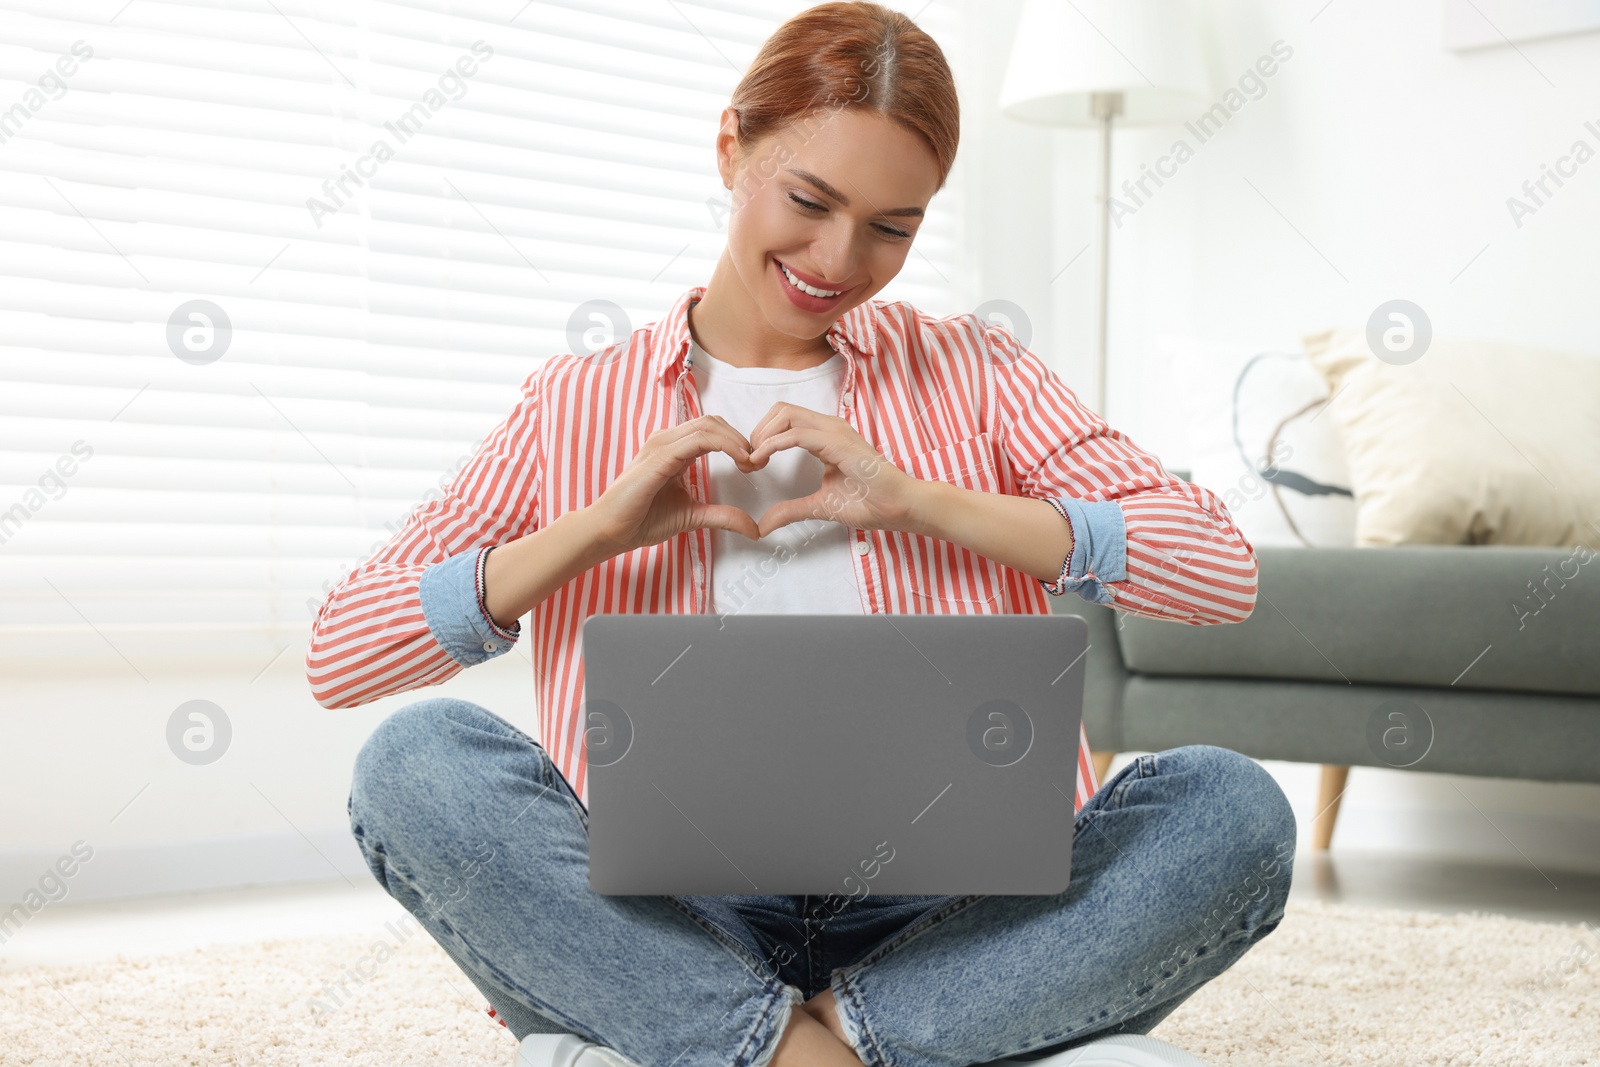 Photo of Woman making heart with hands during video chat via laptop at home. Long-distance relationship